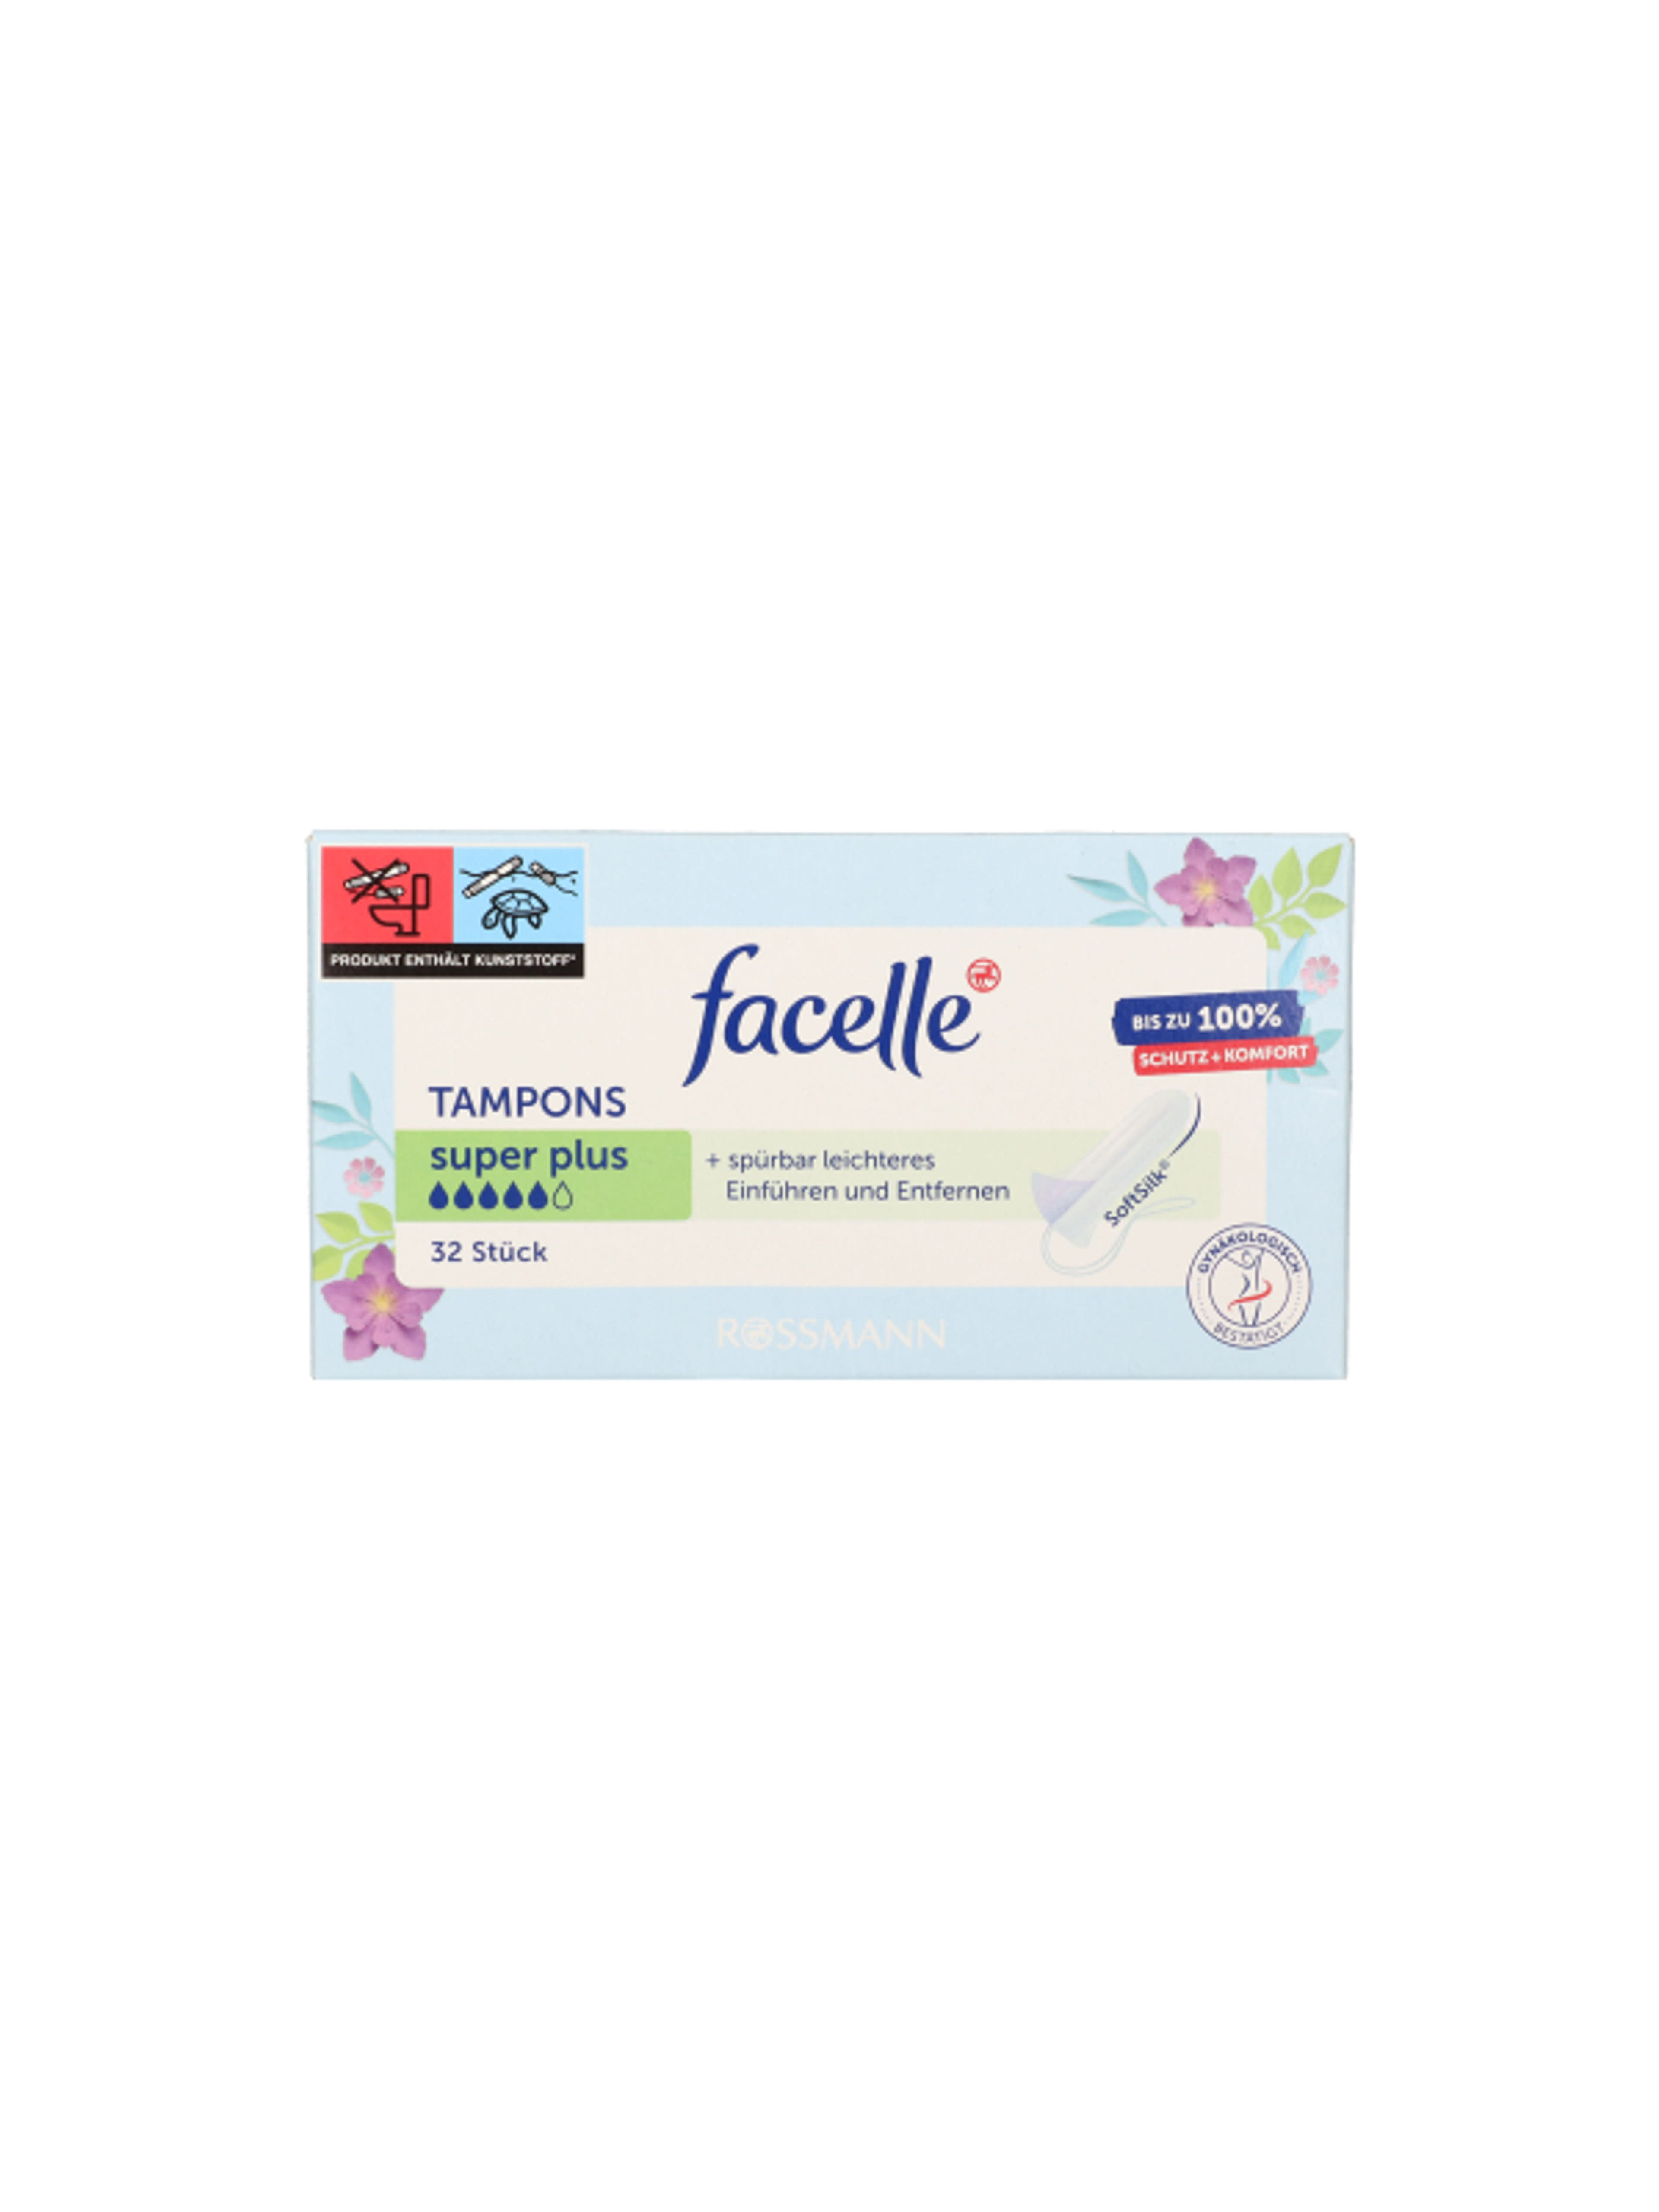 Facelle Super+ tampon - 32 db